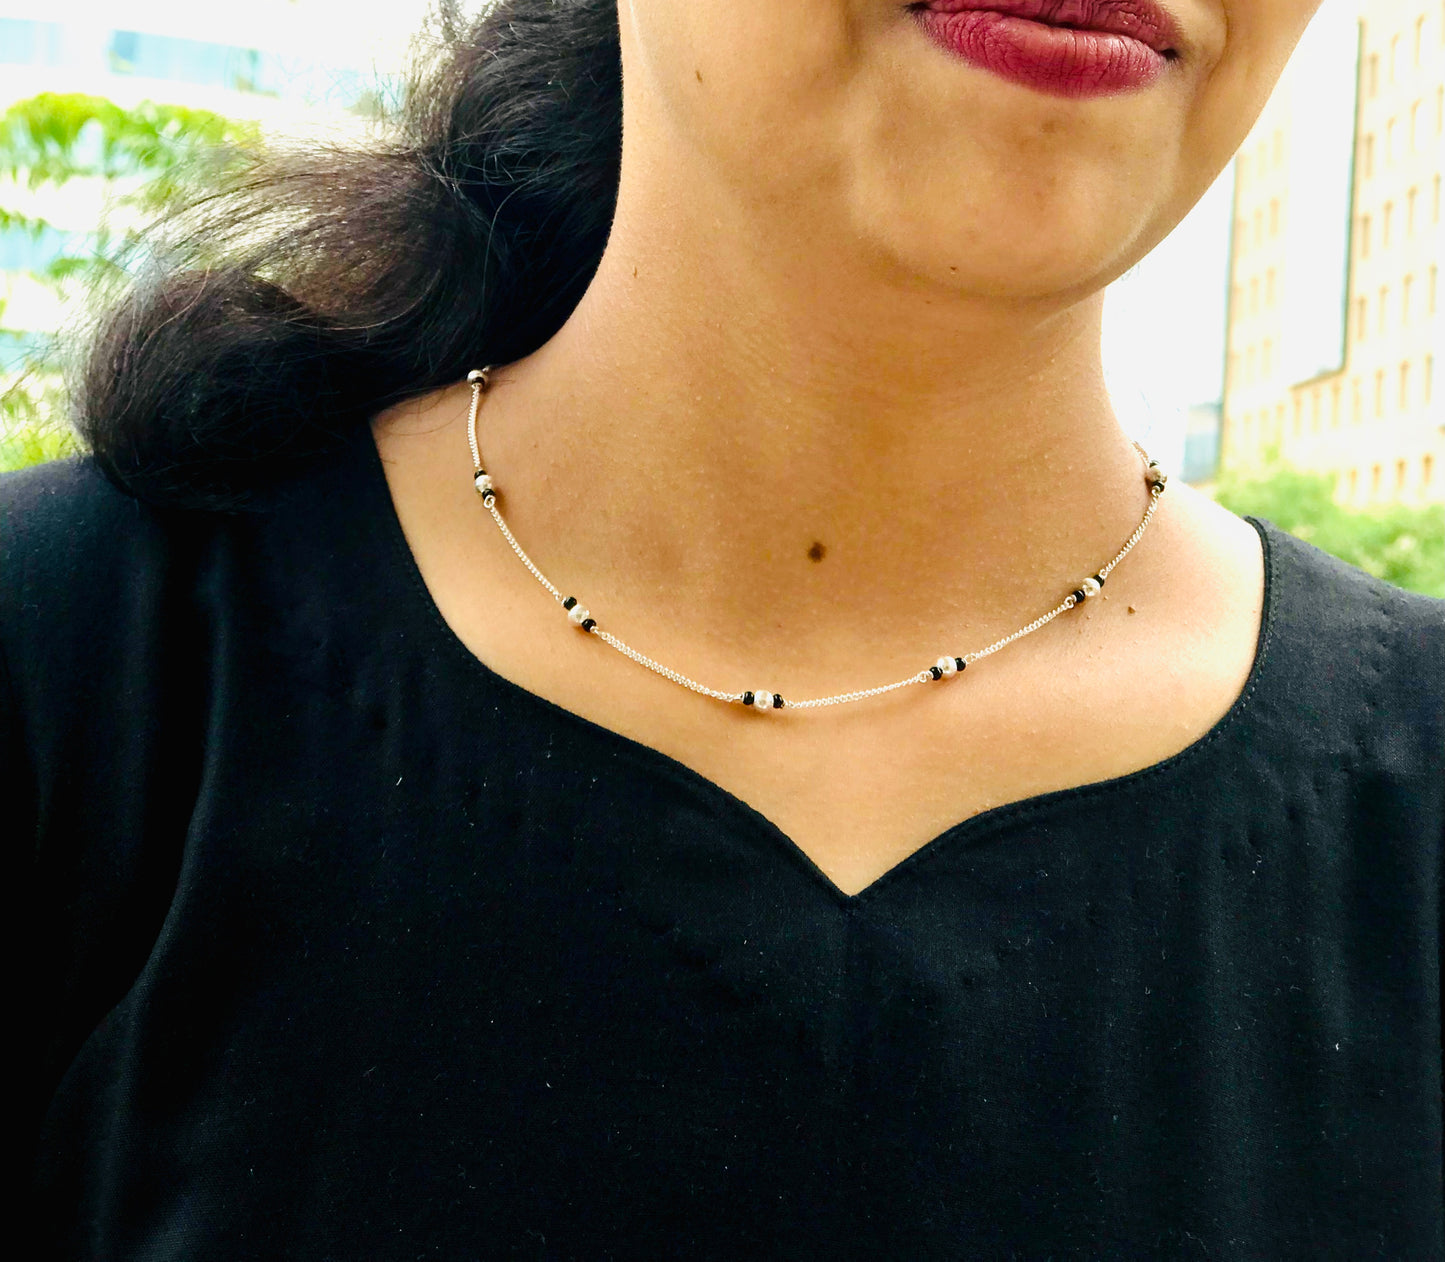 Pure Silver And Black Beads Mangalsutra Chain